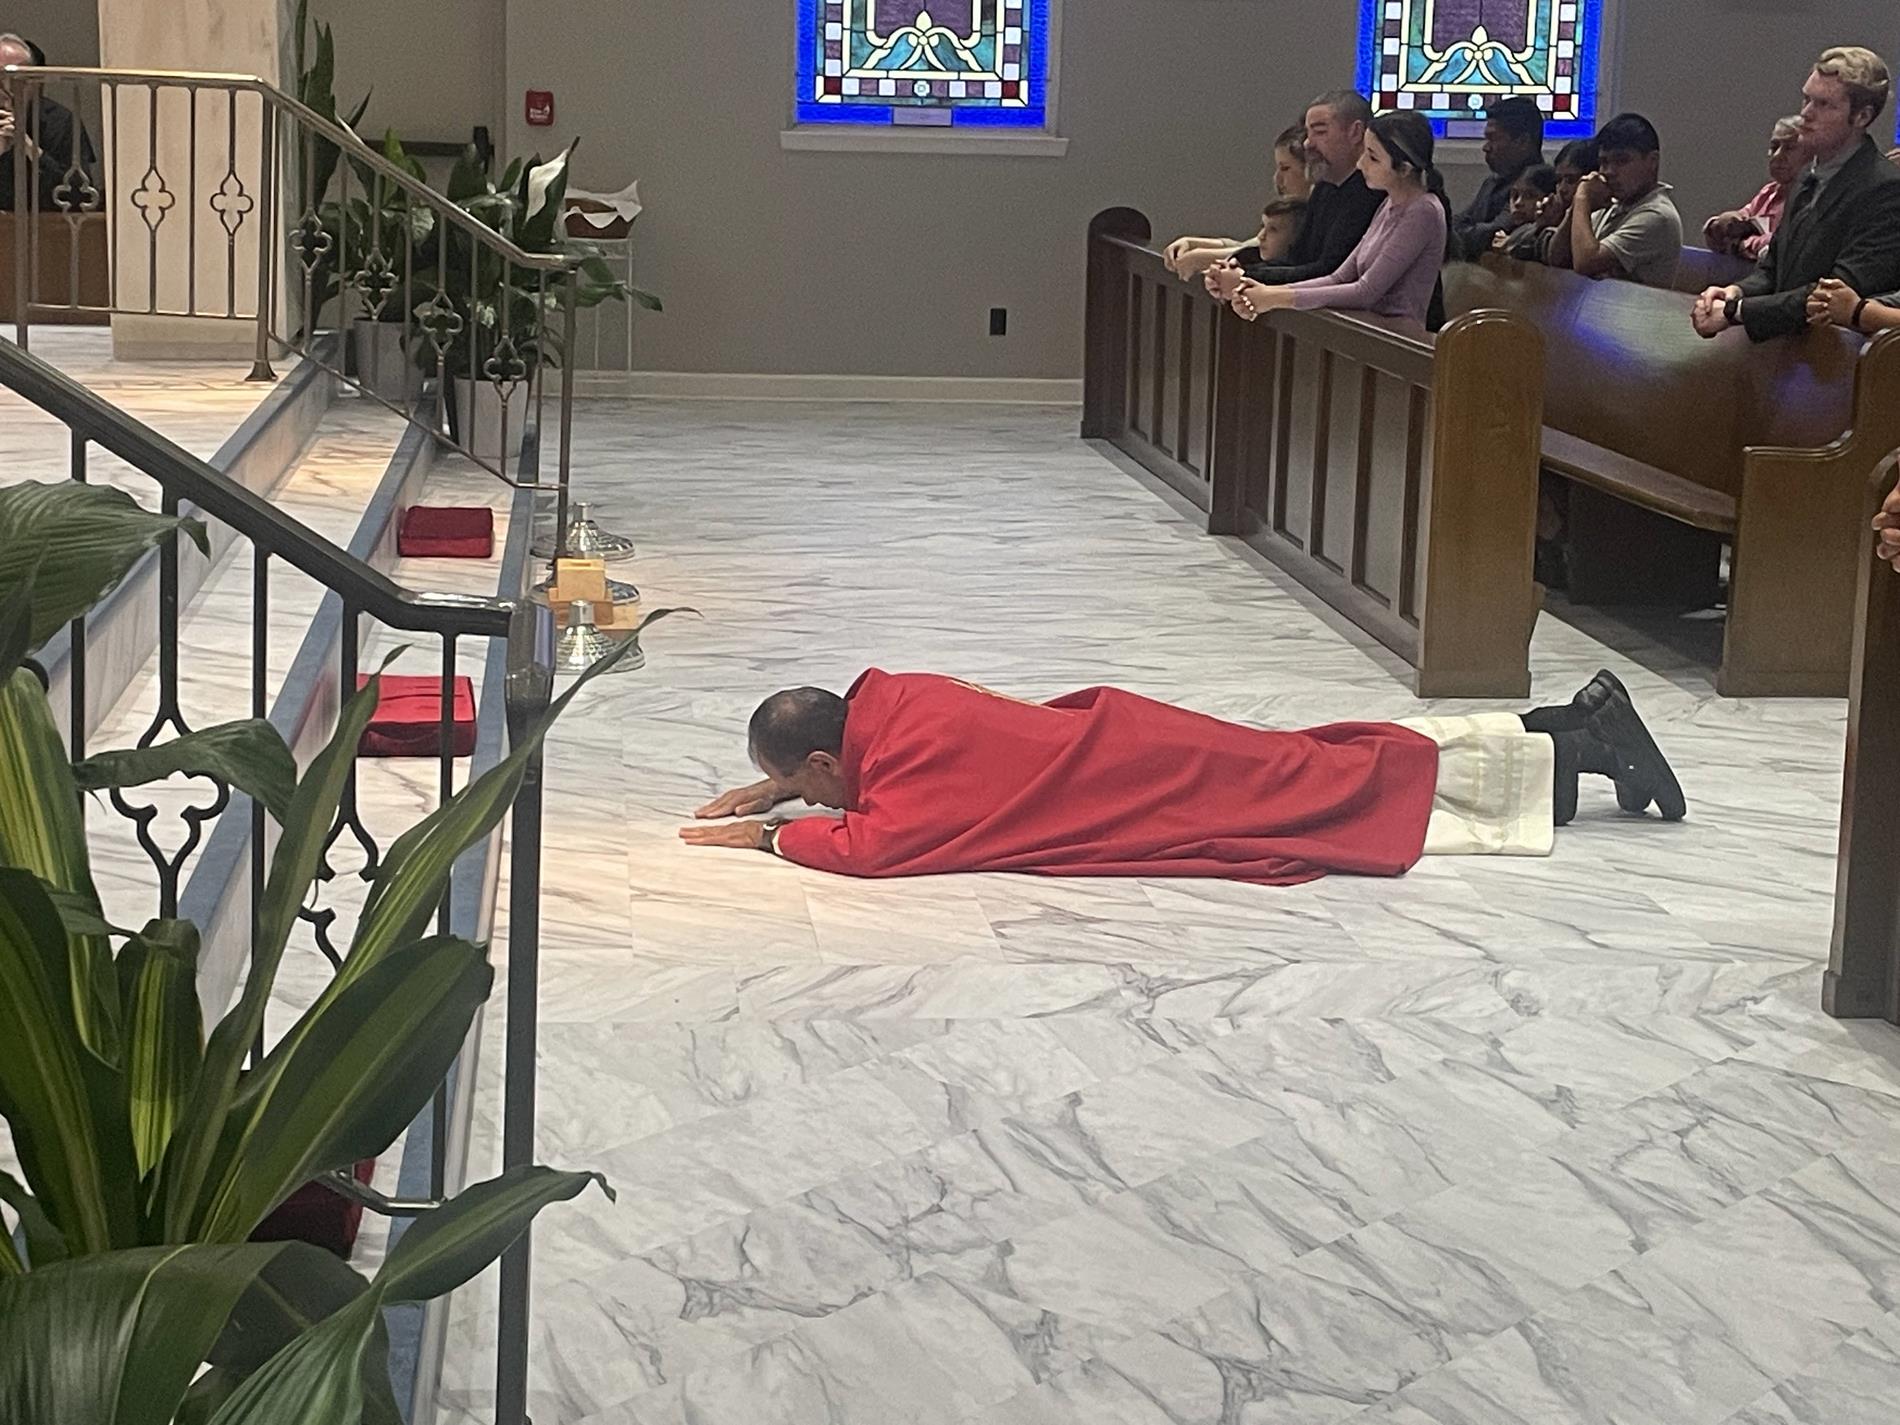 Fr. Antony prostrates himself before the altar